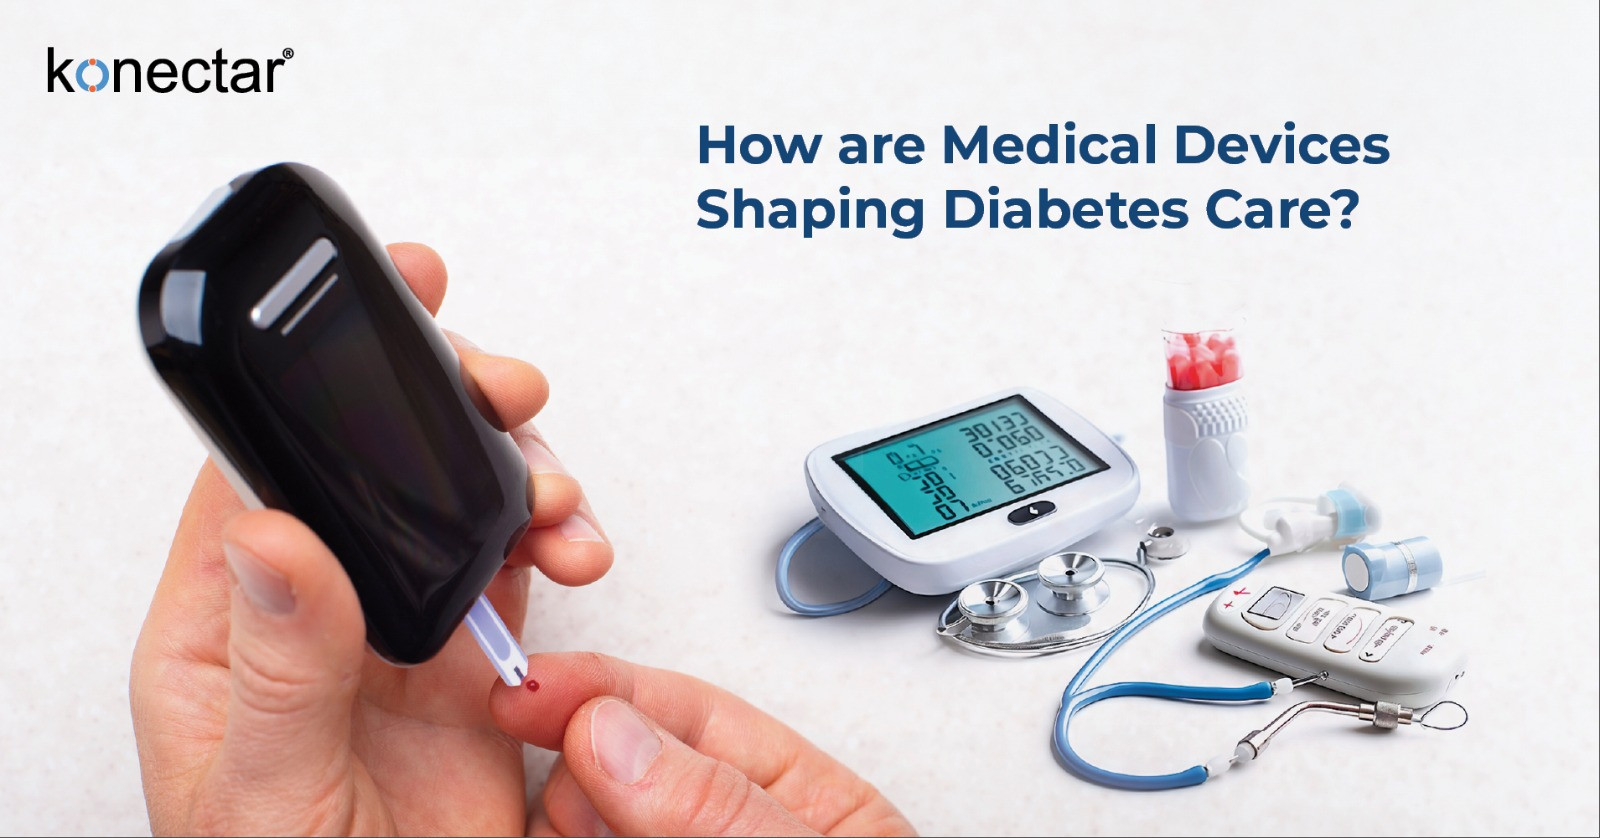 How are Medical Devices Shaping Diabetes Care?